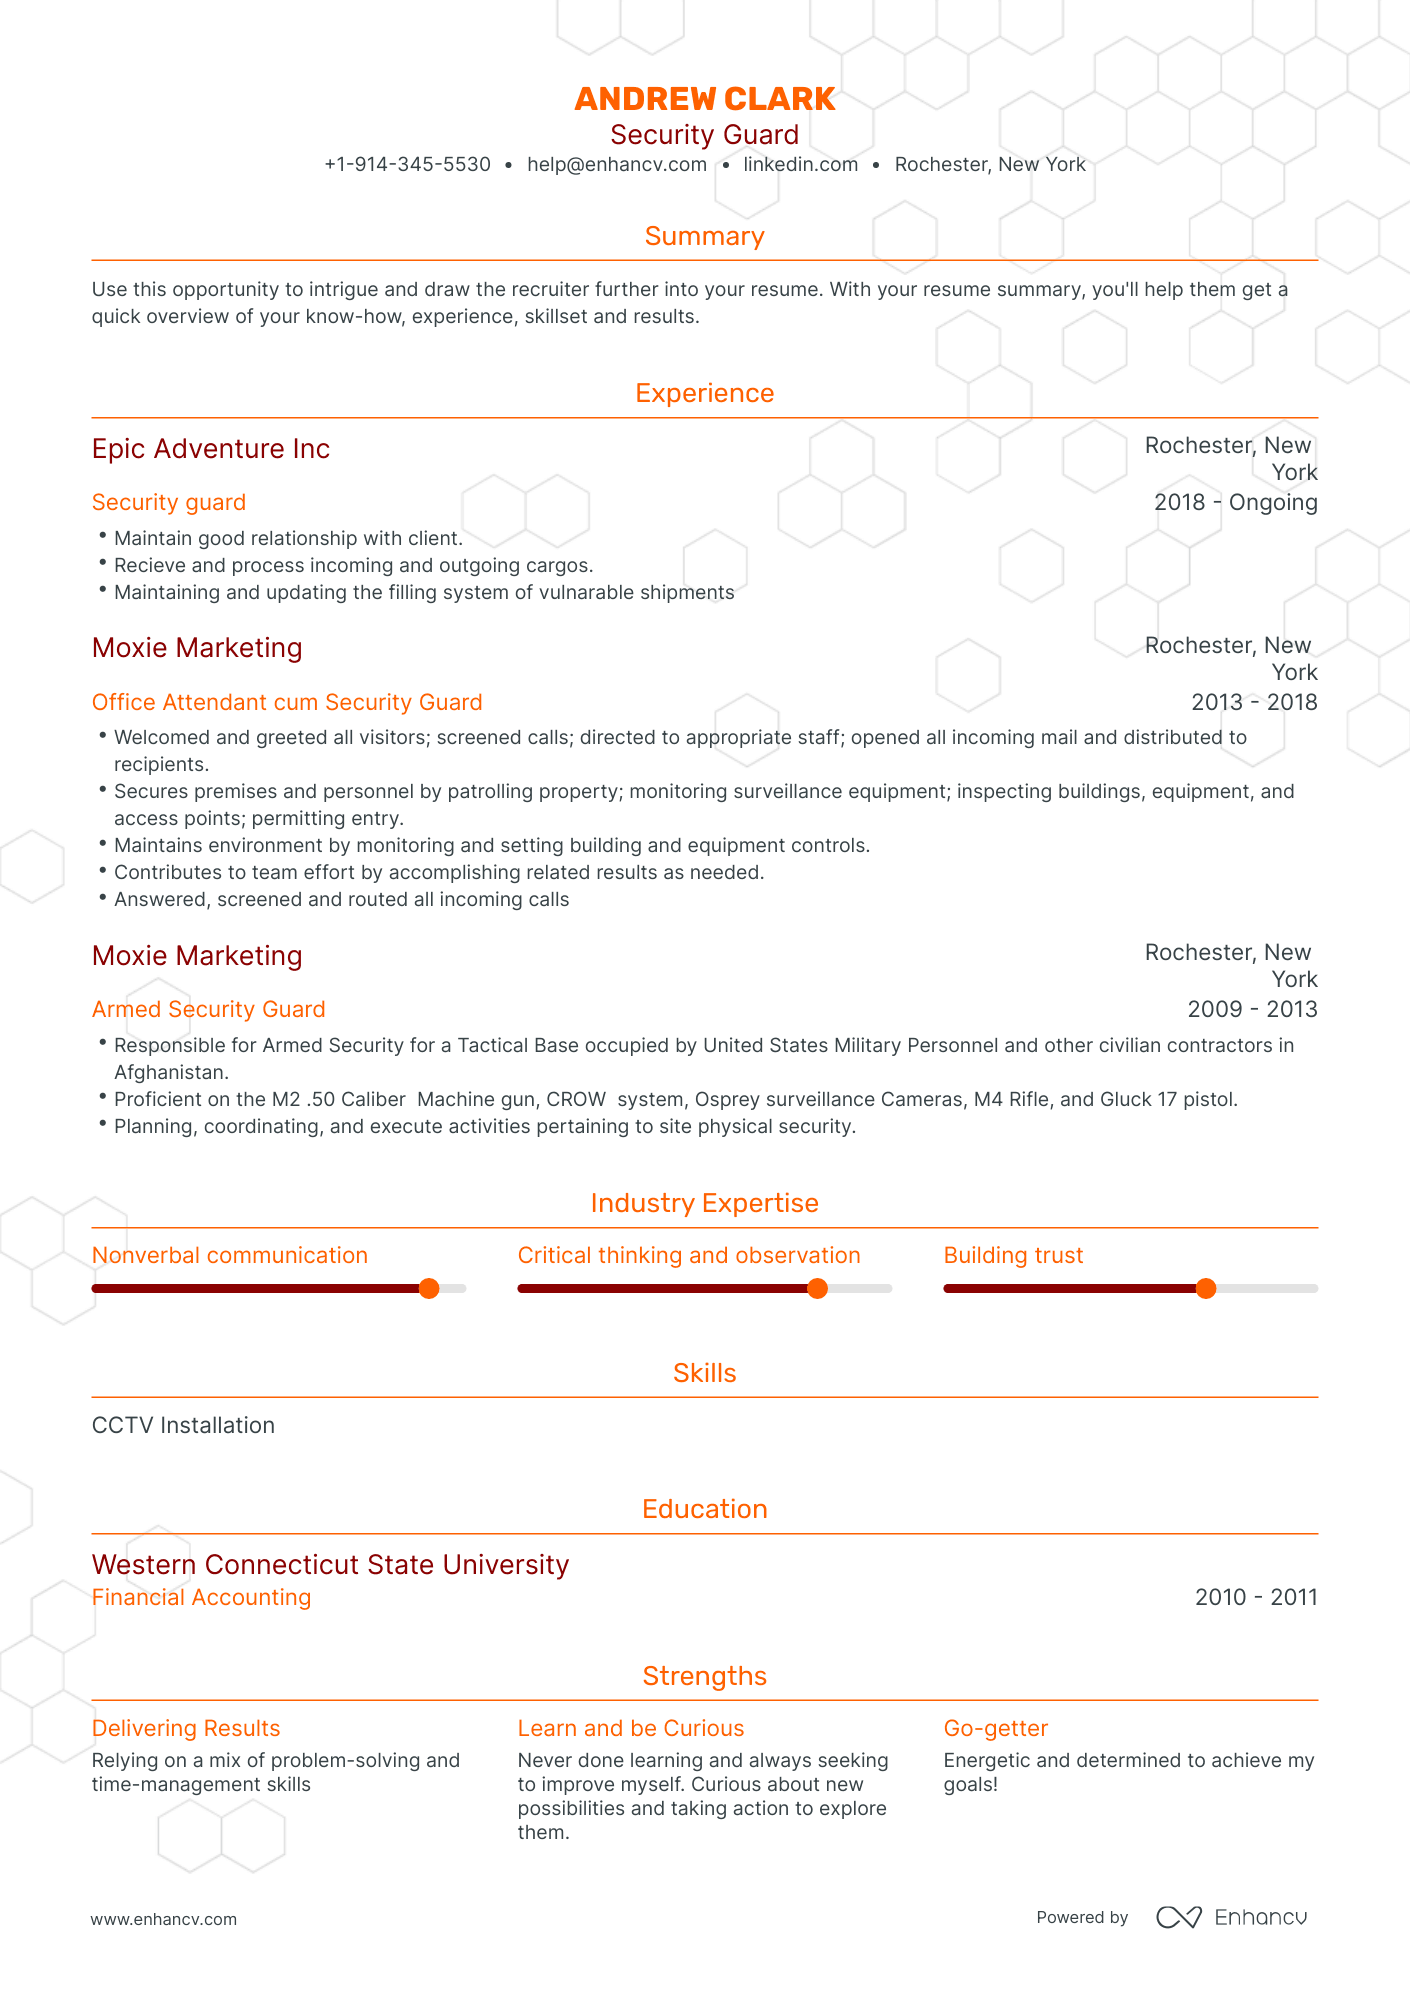 Traditional Security Guard Resume Template